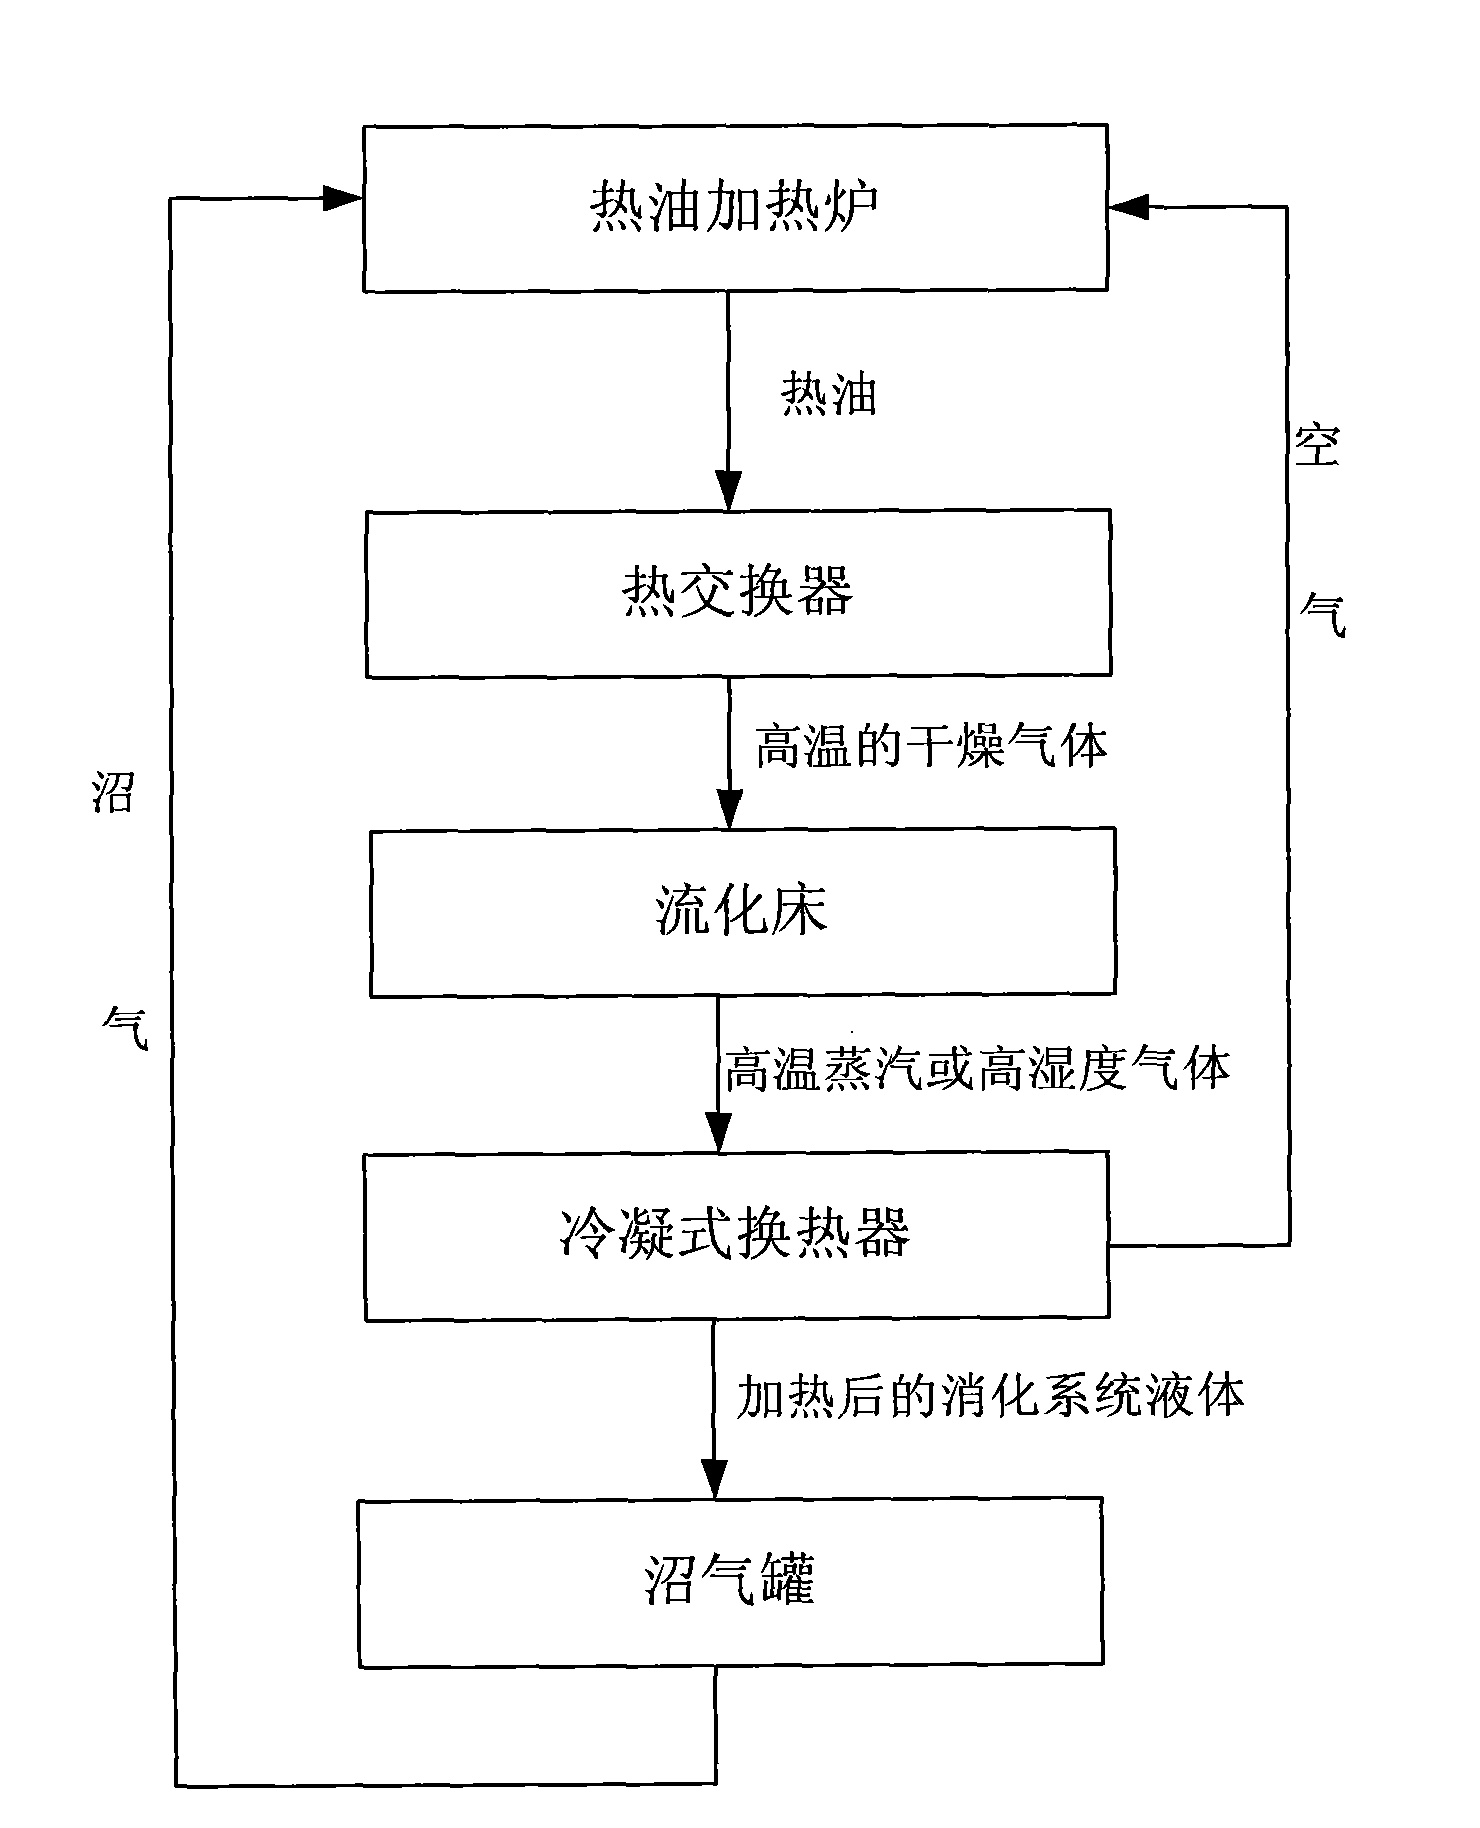 Method for applying sludge heat drying and sludge digestion fermentation in combining way